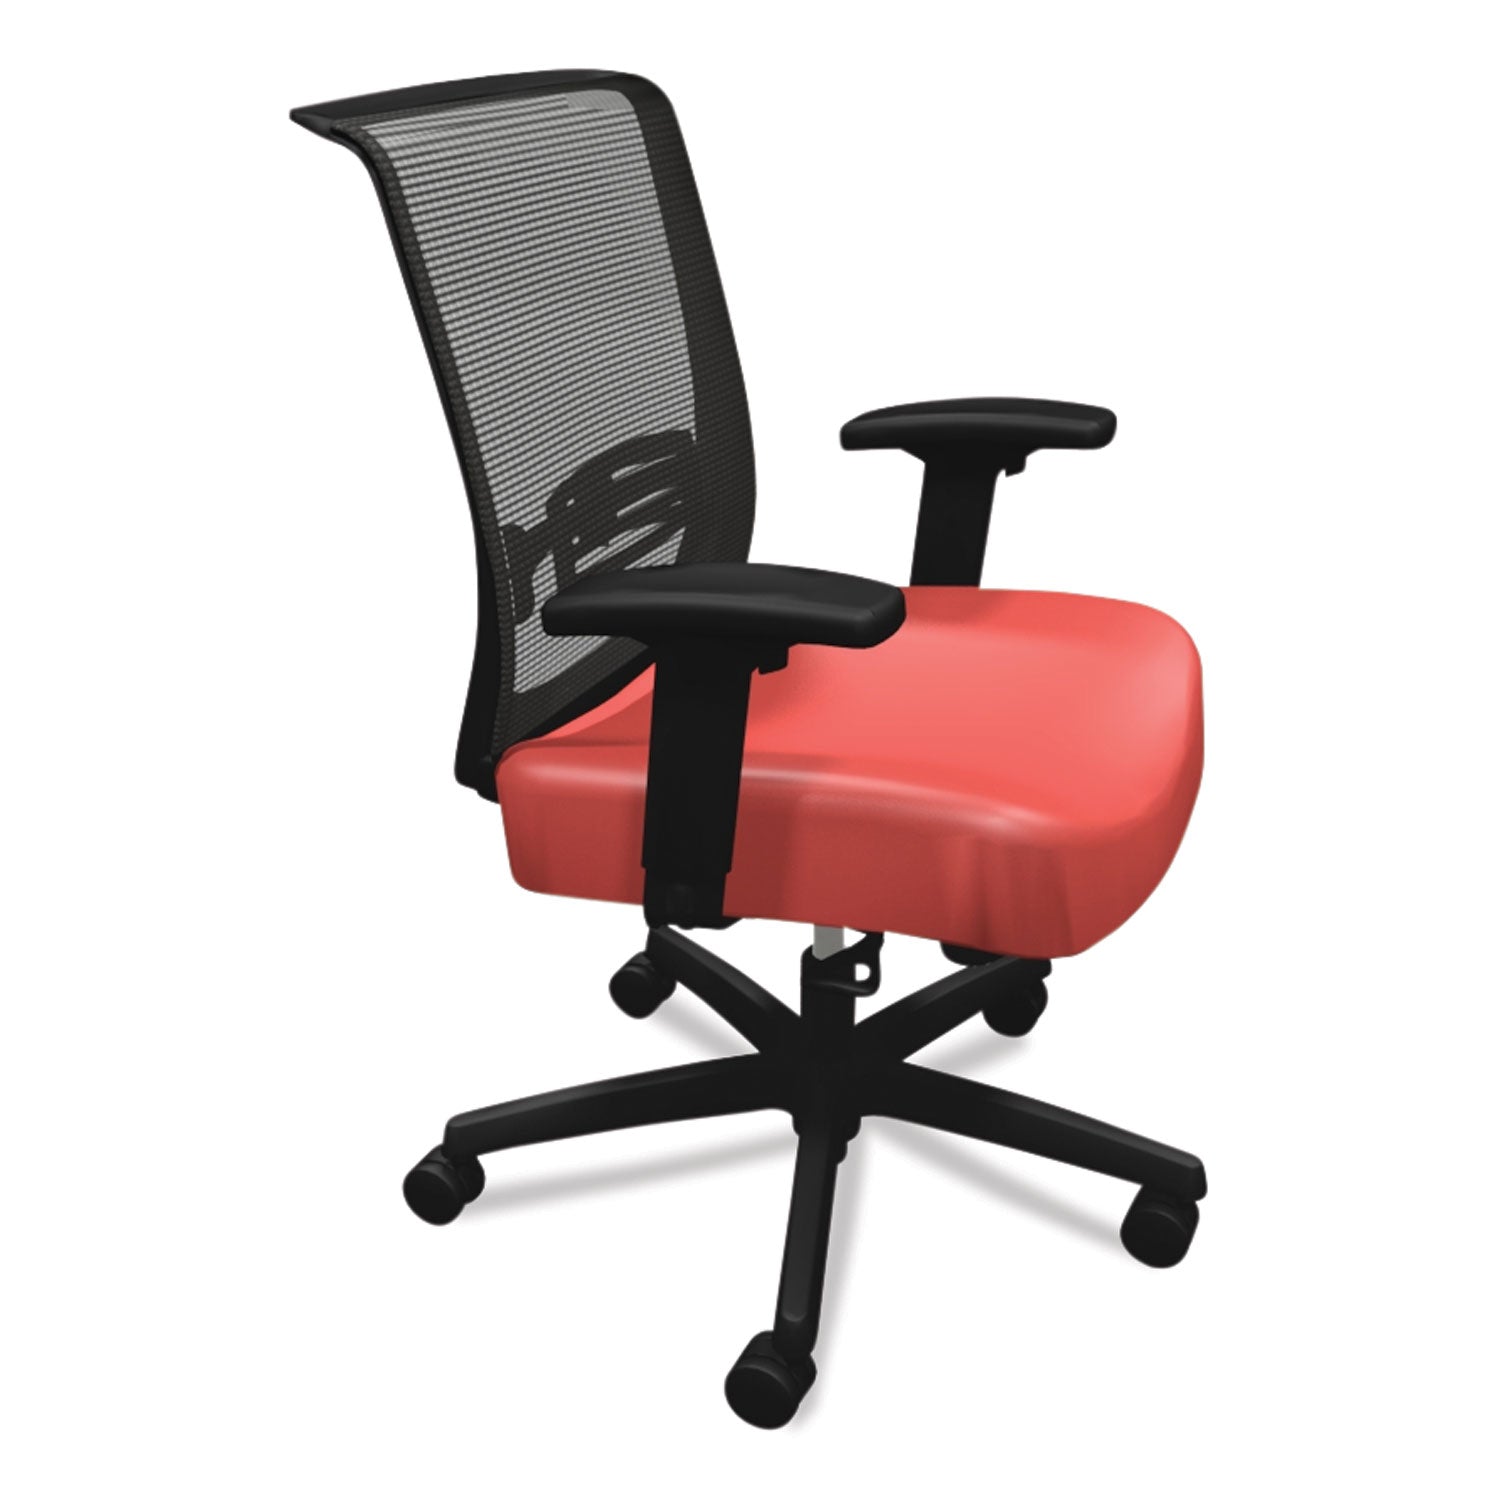 convergence-mid-back-task-chair-swivel-tilt-supports-up-to-275-lb-165-to-21-seat-height-red-seat-black-back-base_honcmz1acu67 - 3